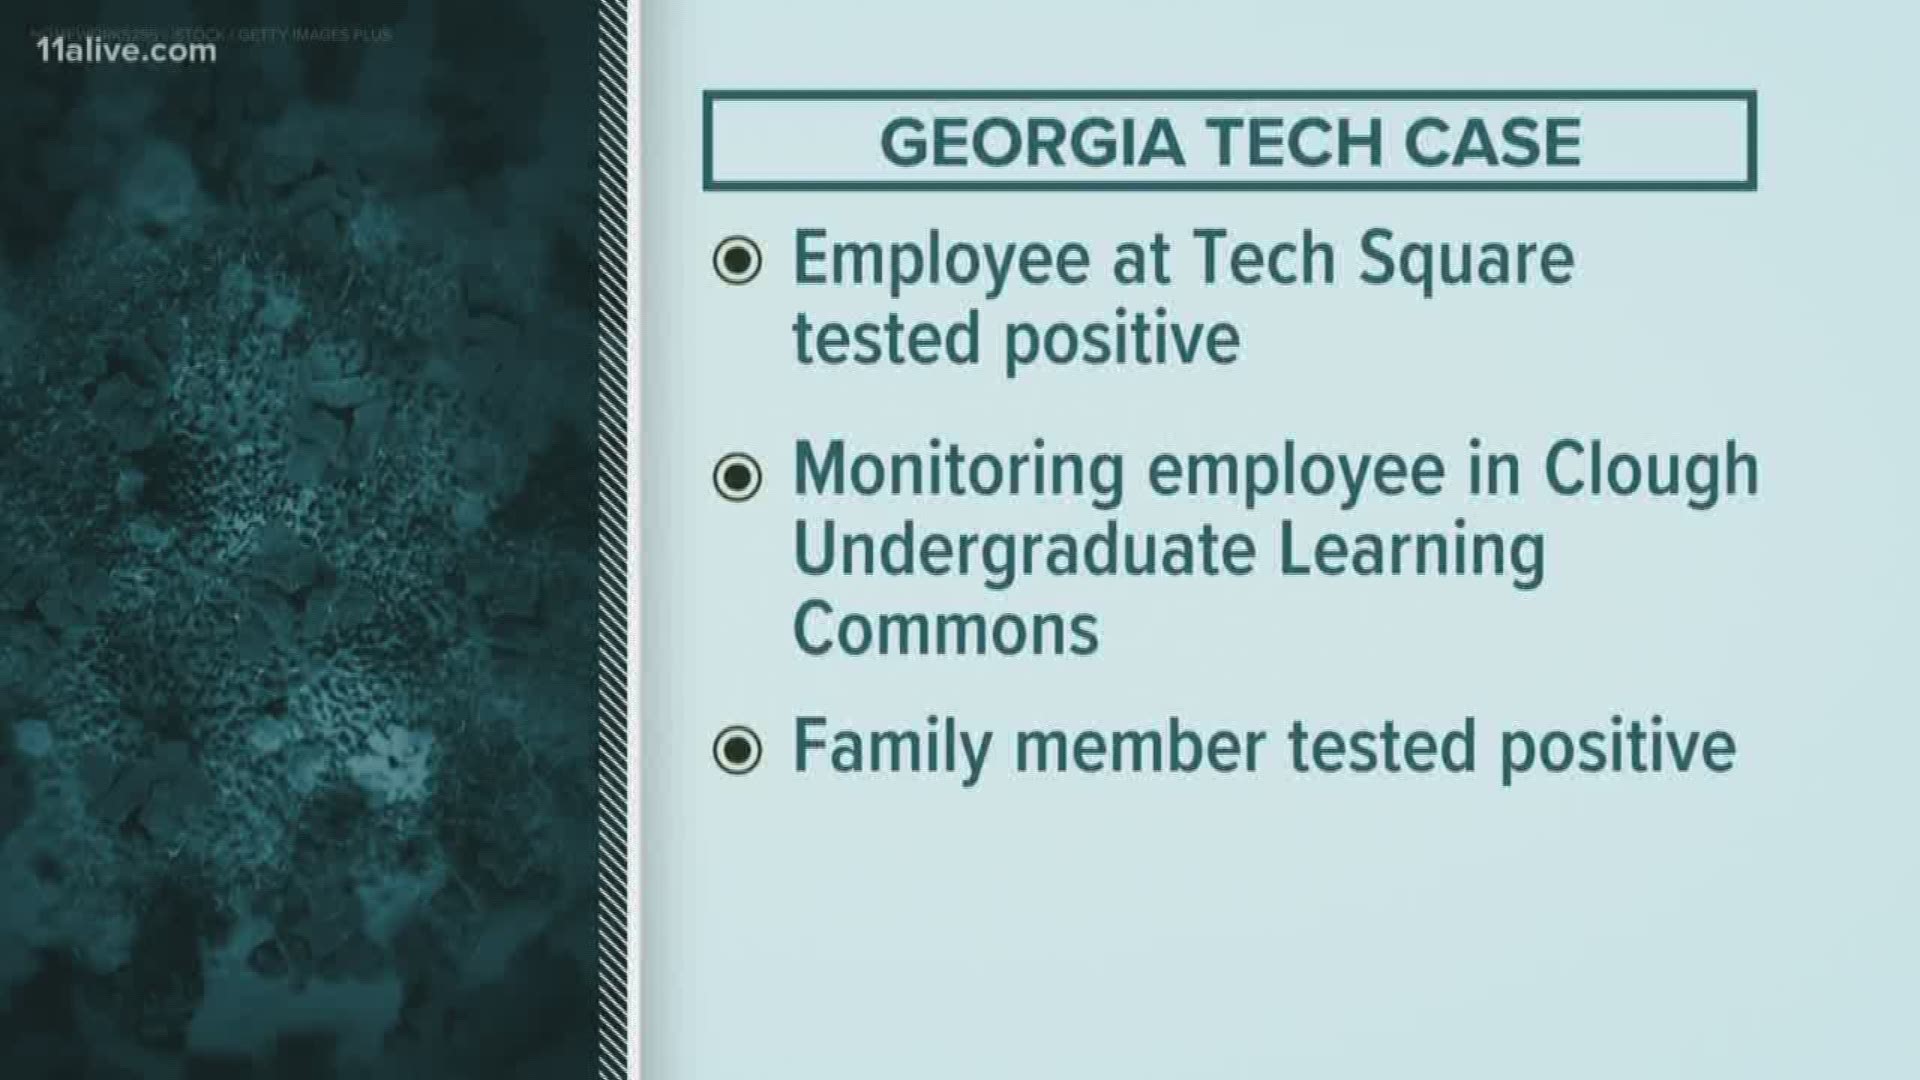 An employee who works in a building at Tech Square tested positive for COVID-19 according to a statement from Georgia Tech on Saturday.